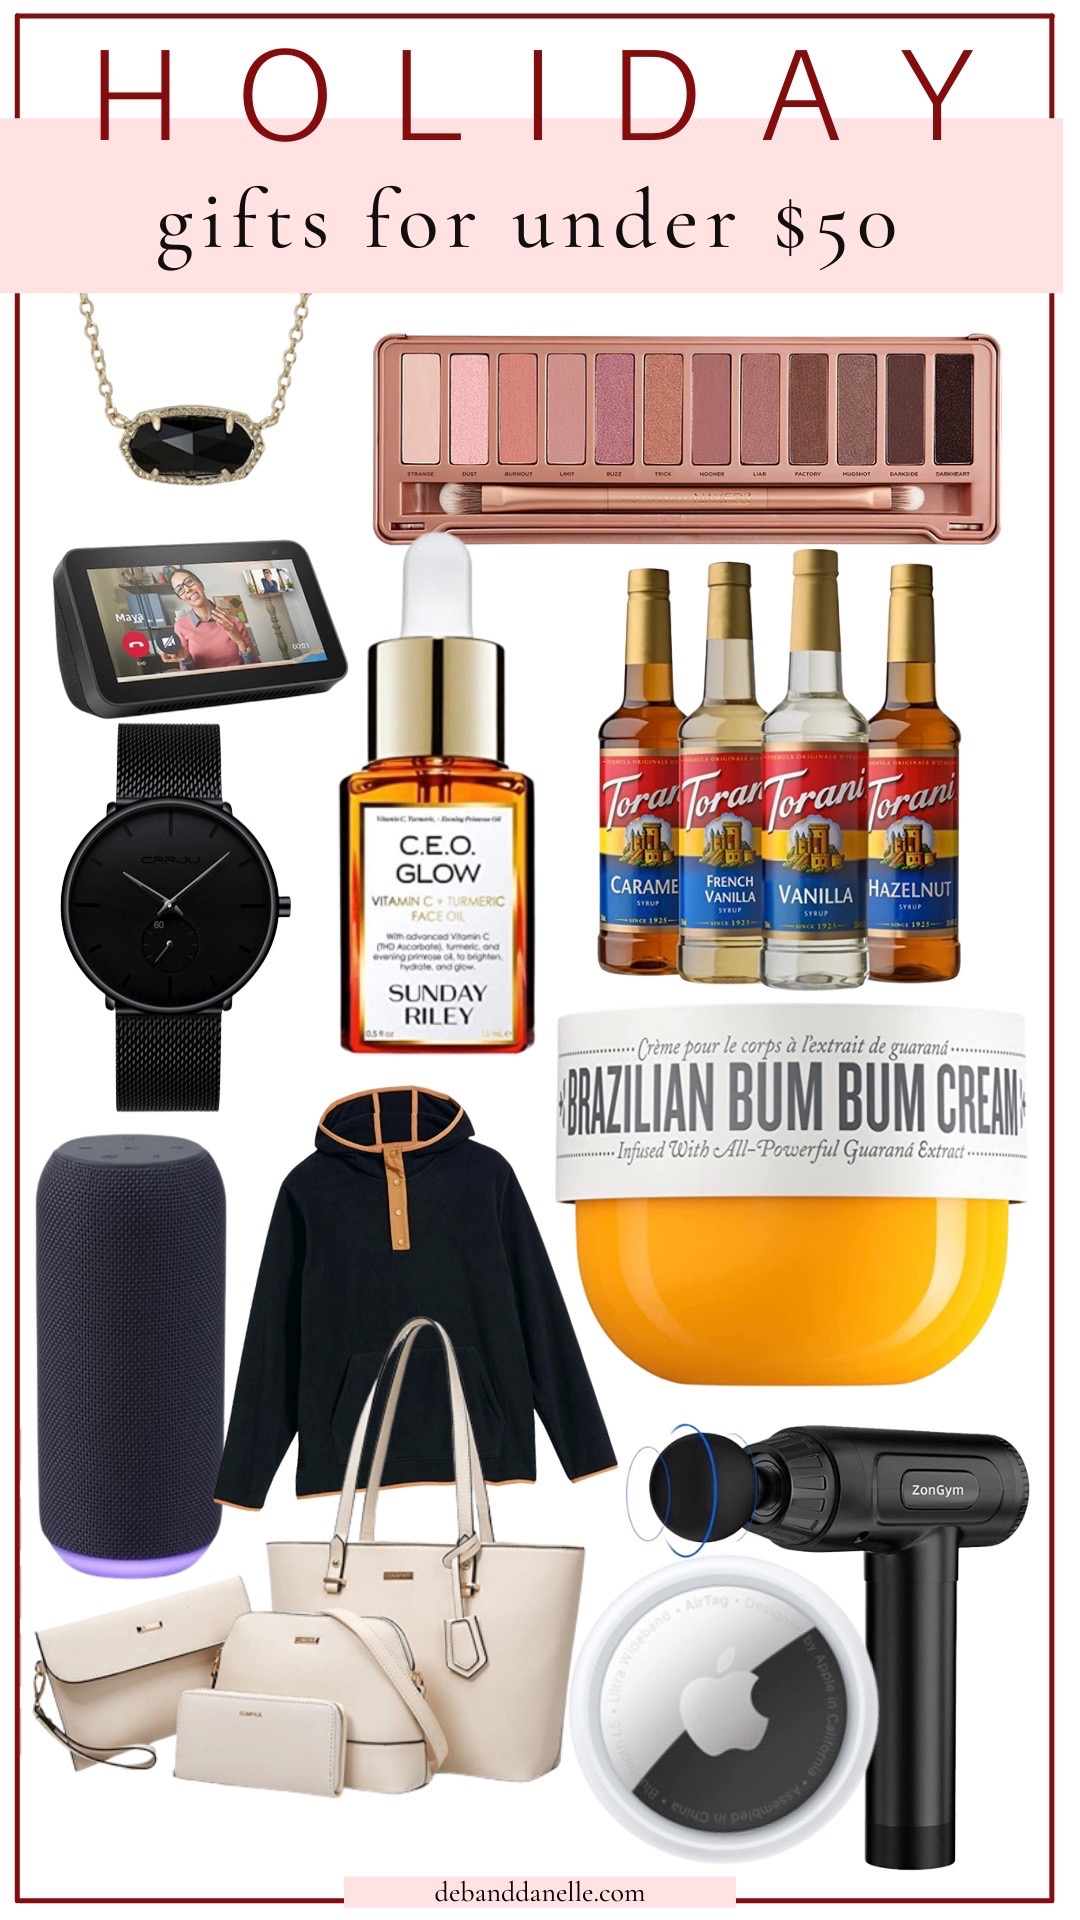 Gift Guide - Deb and Danelle